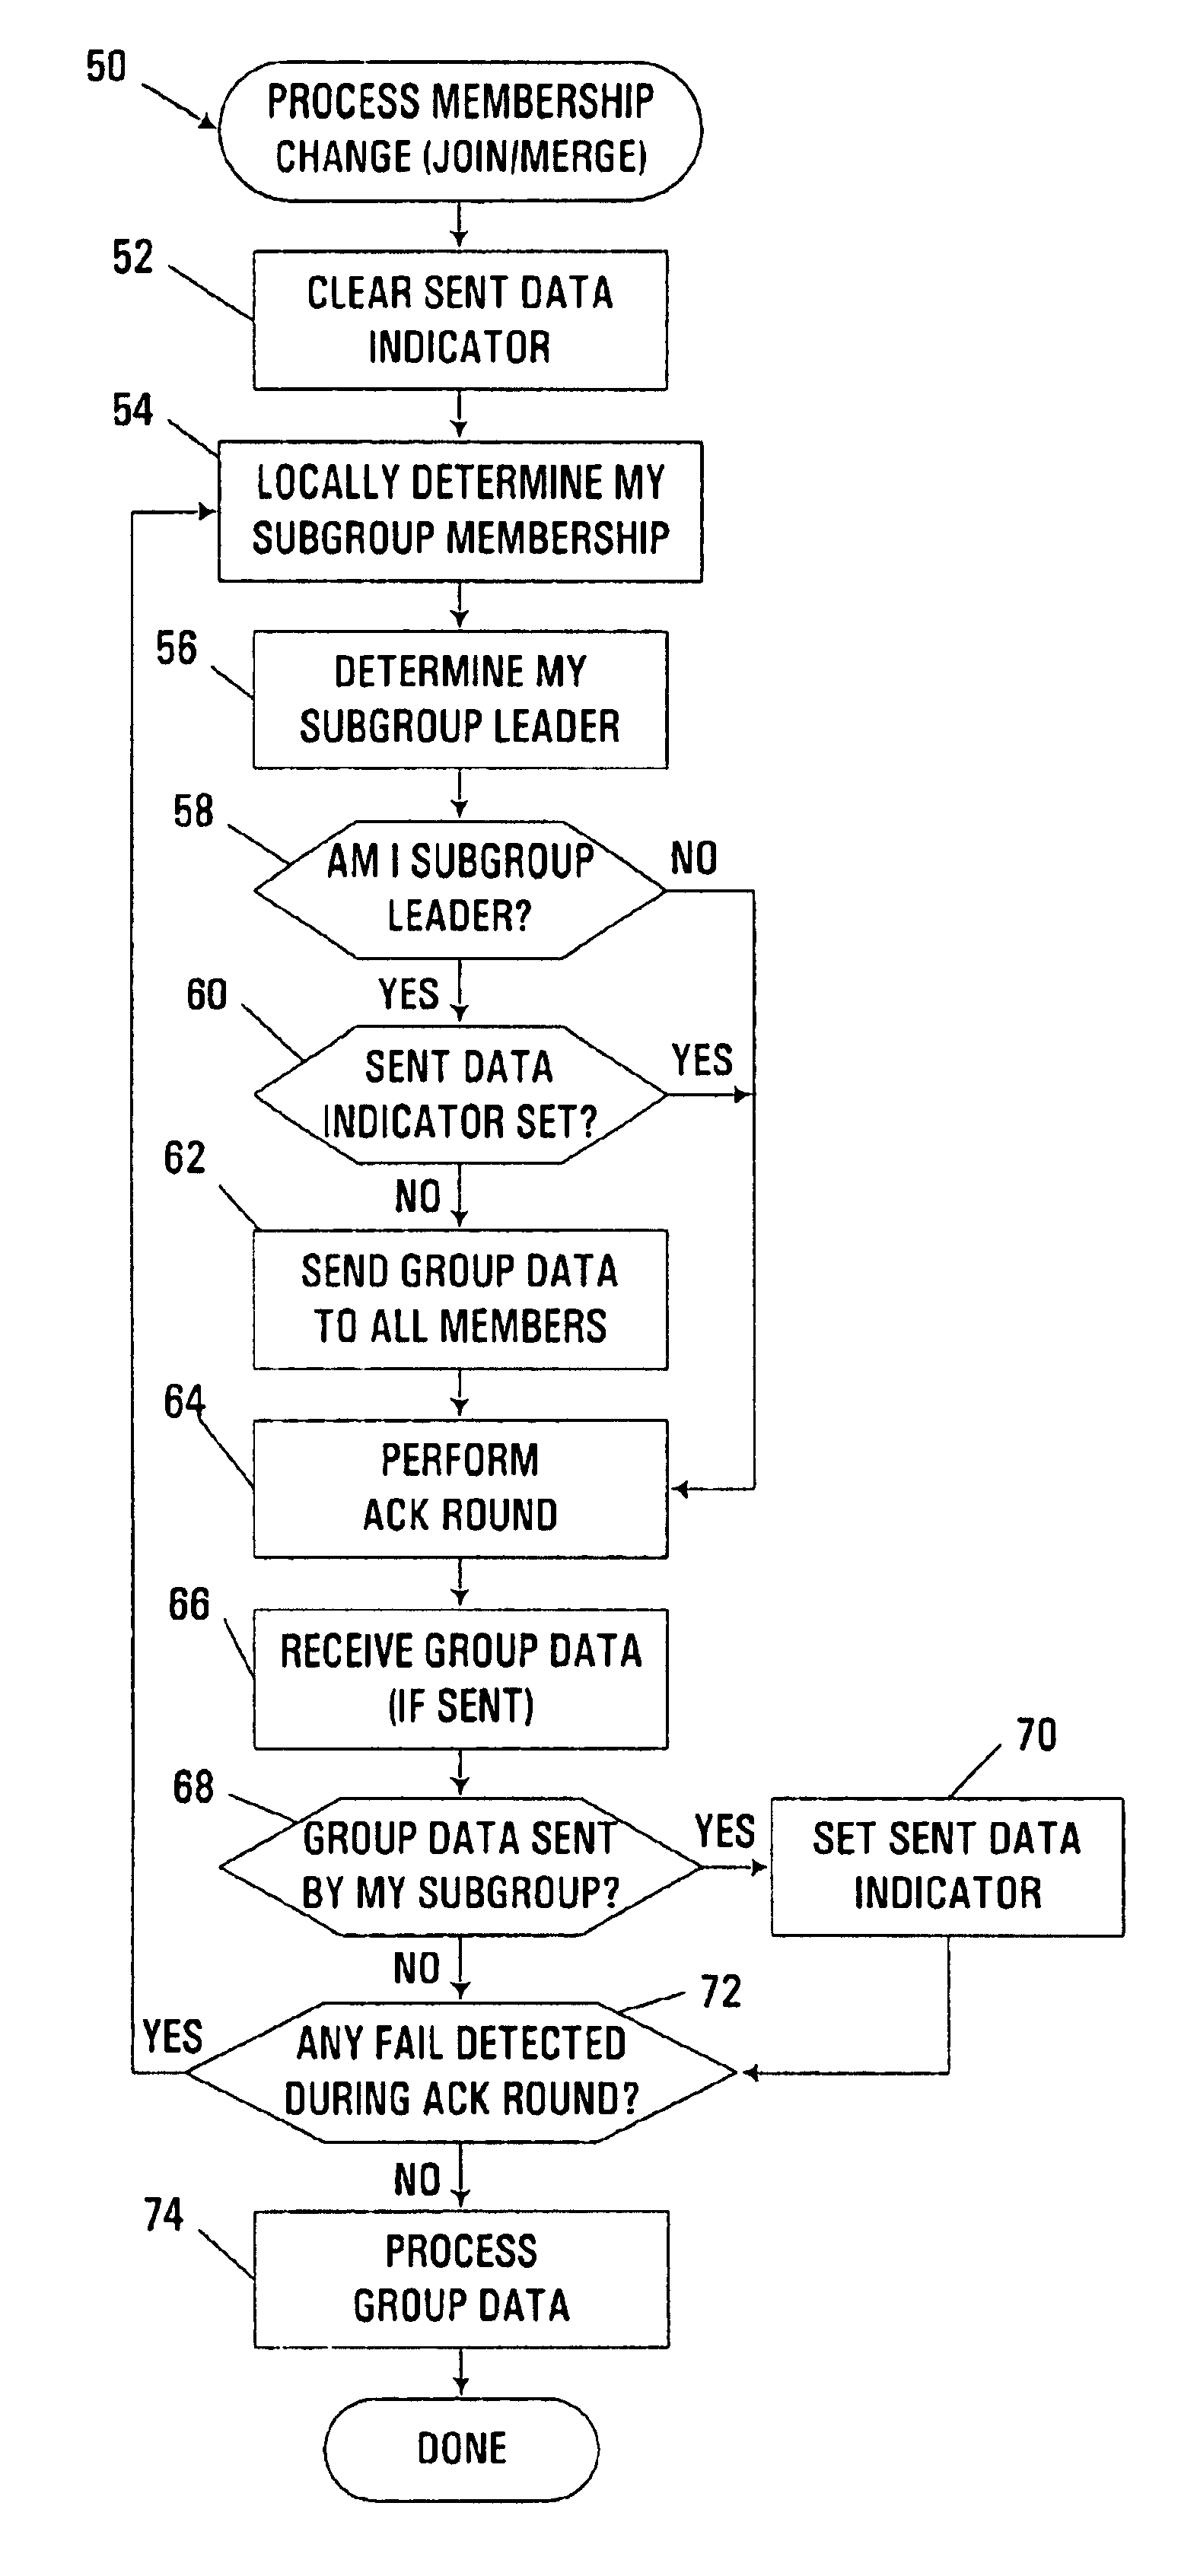 Group data sharing during membership change in clustered computer system